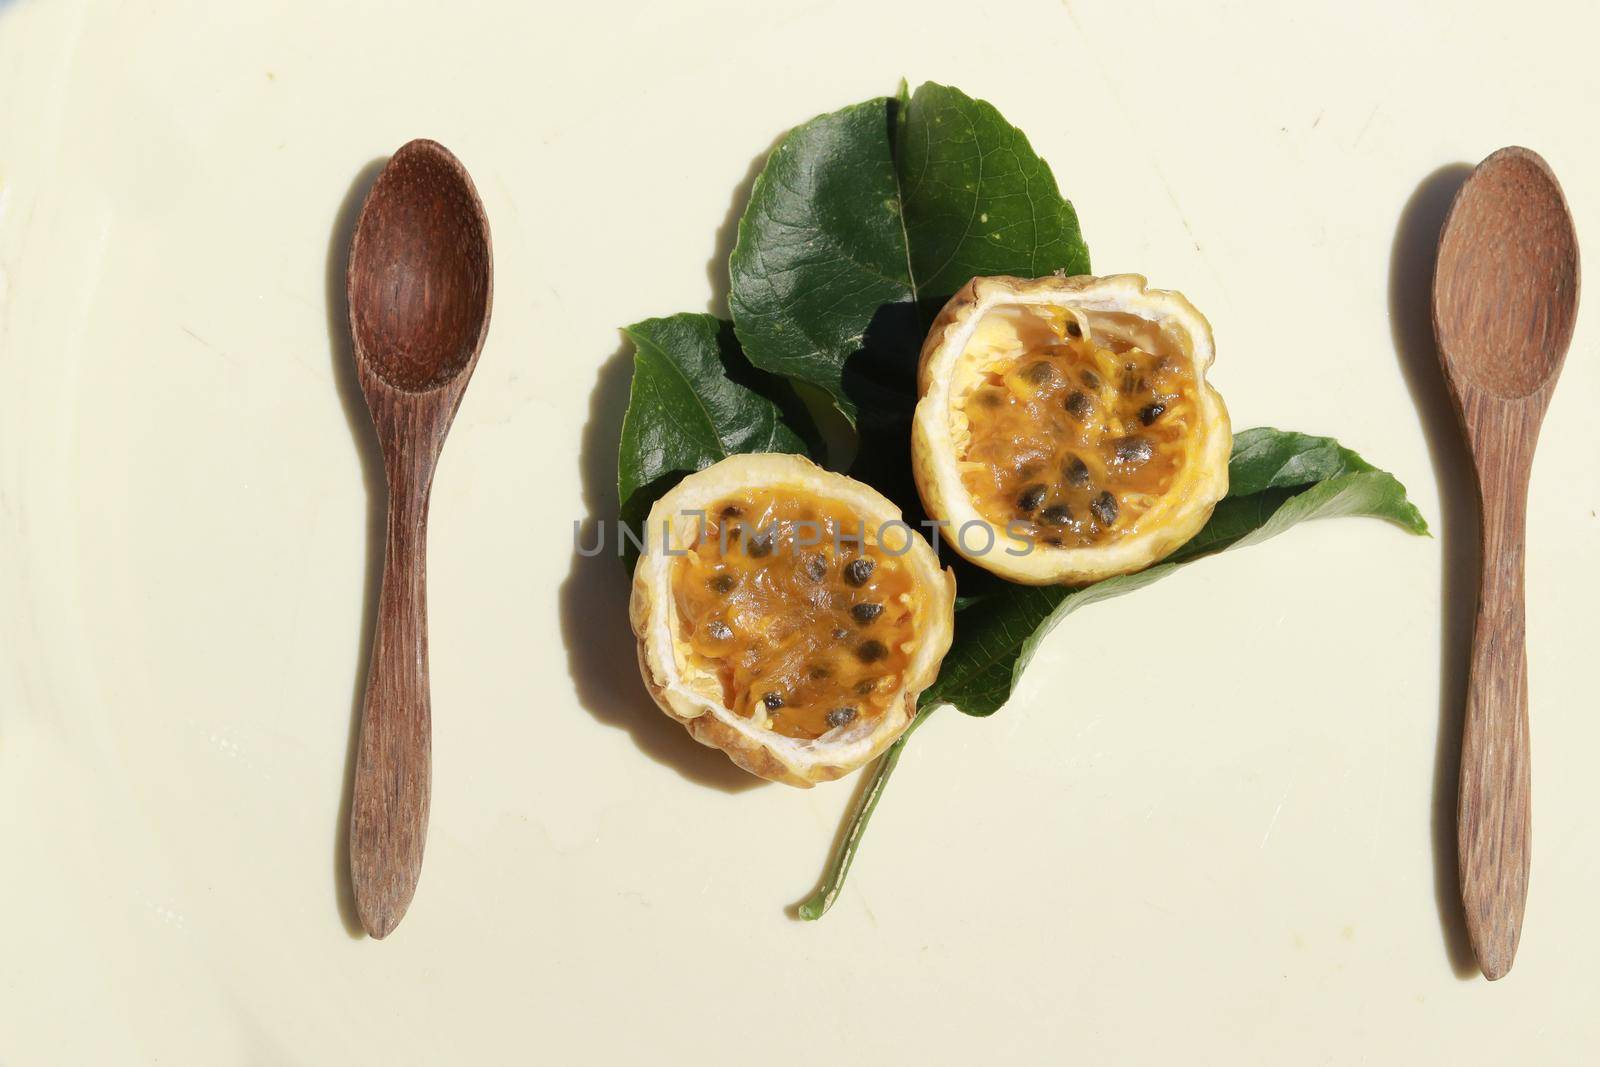 Top view of wooden spoon and yellow passion fruit sliced in half